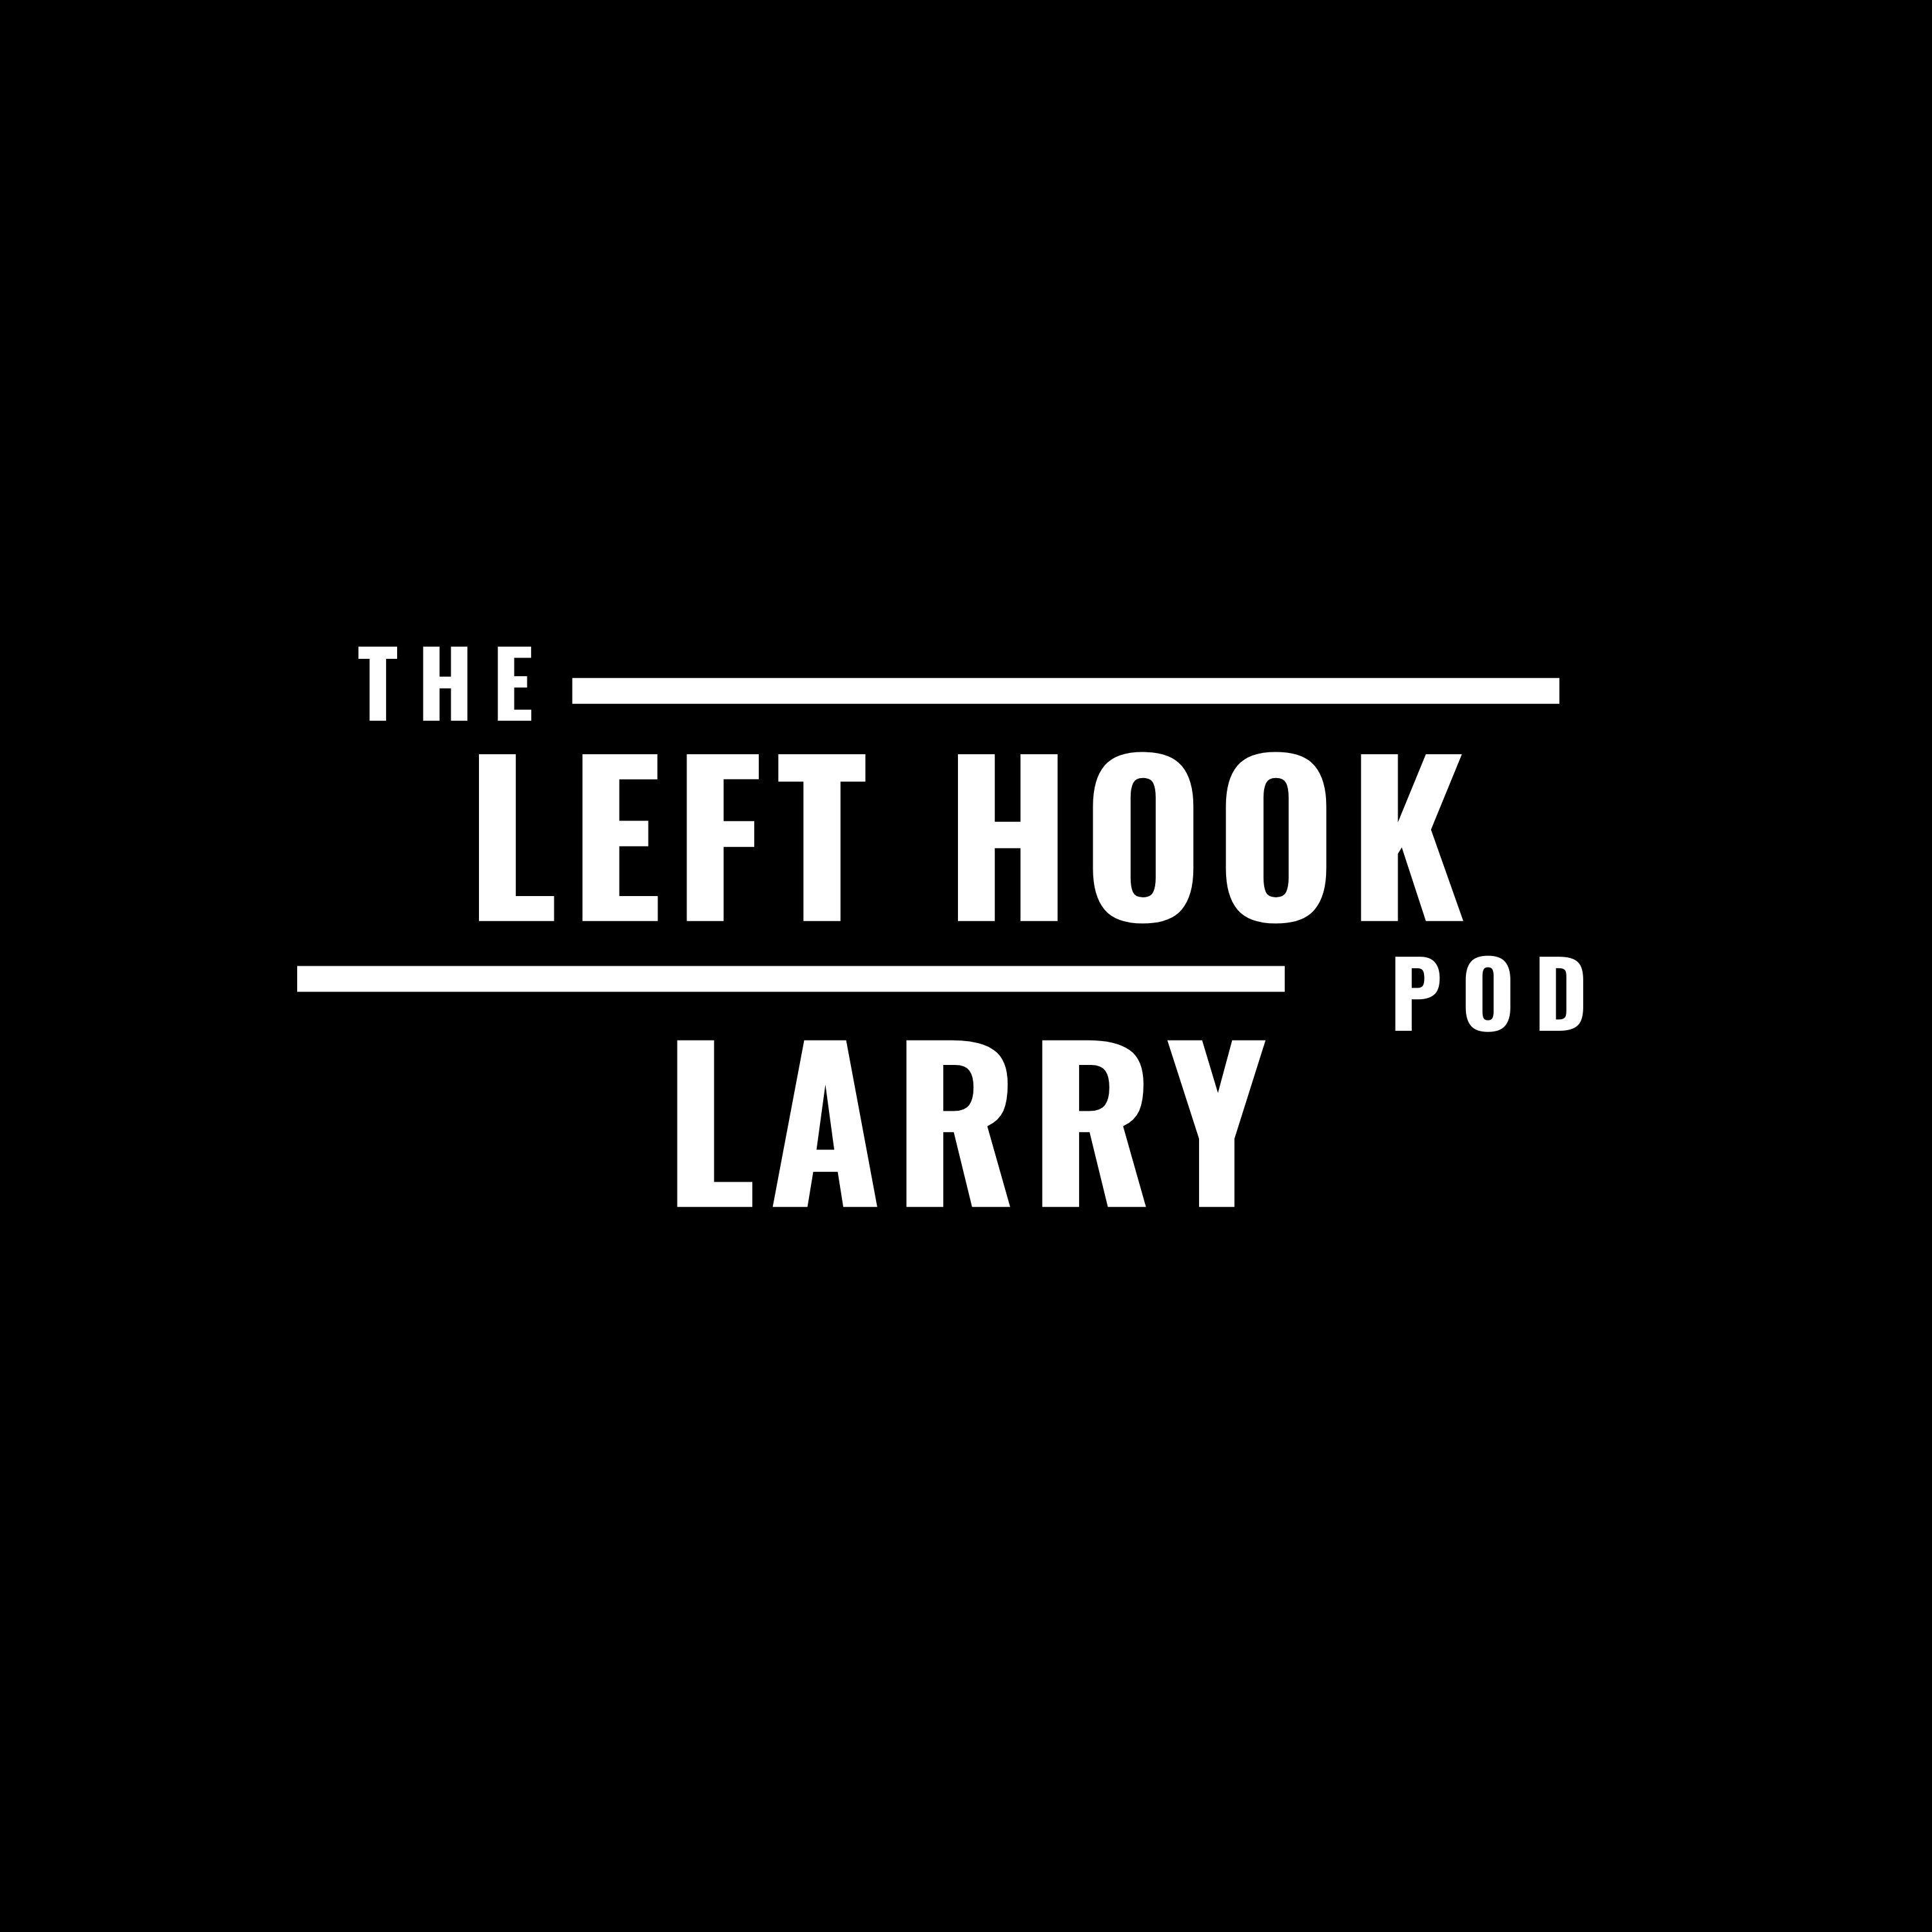 The Left Hook Larry Podcast